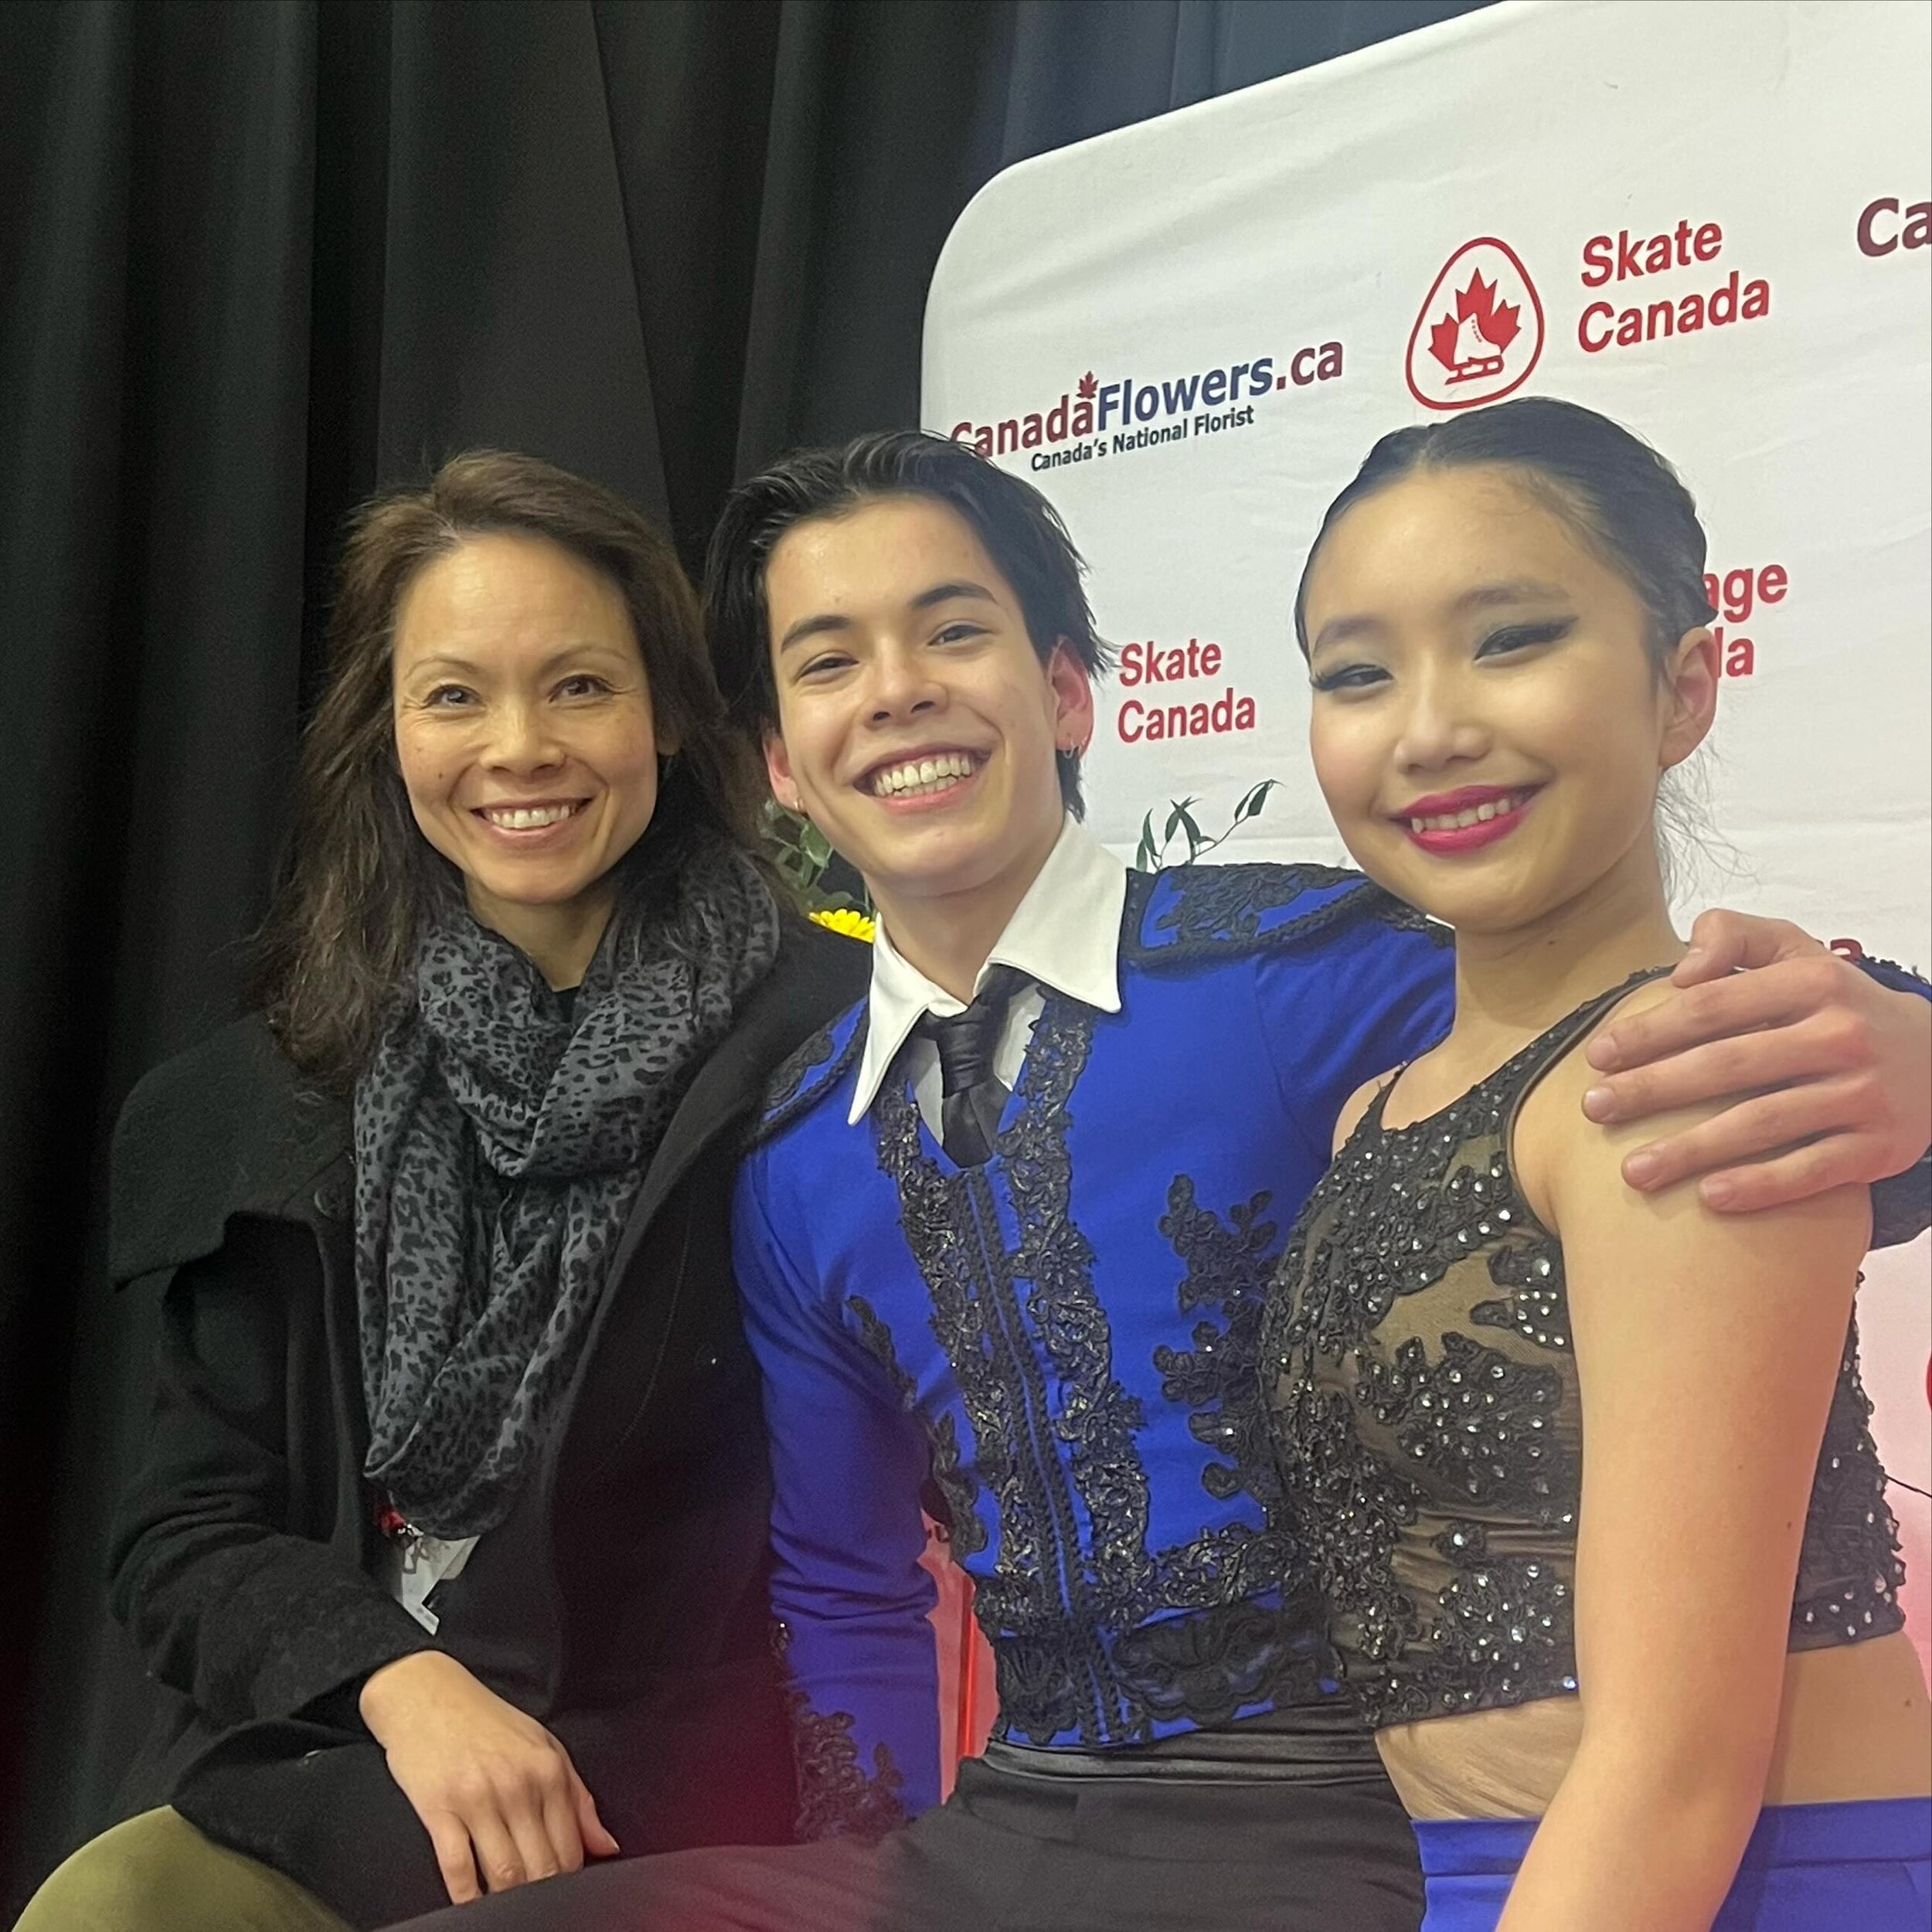 Congrats Tasha and Mickey sitting in 3rd day one at Skate Canada Novice Nationals😀 #skatecanada #vancouvericedance #bcyksection